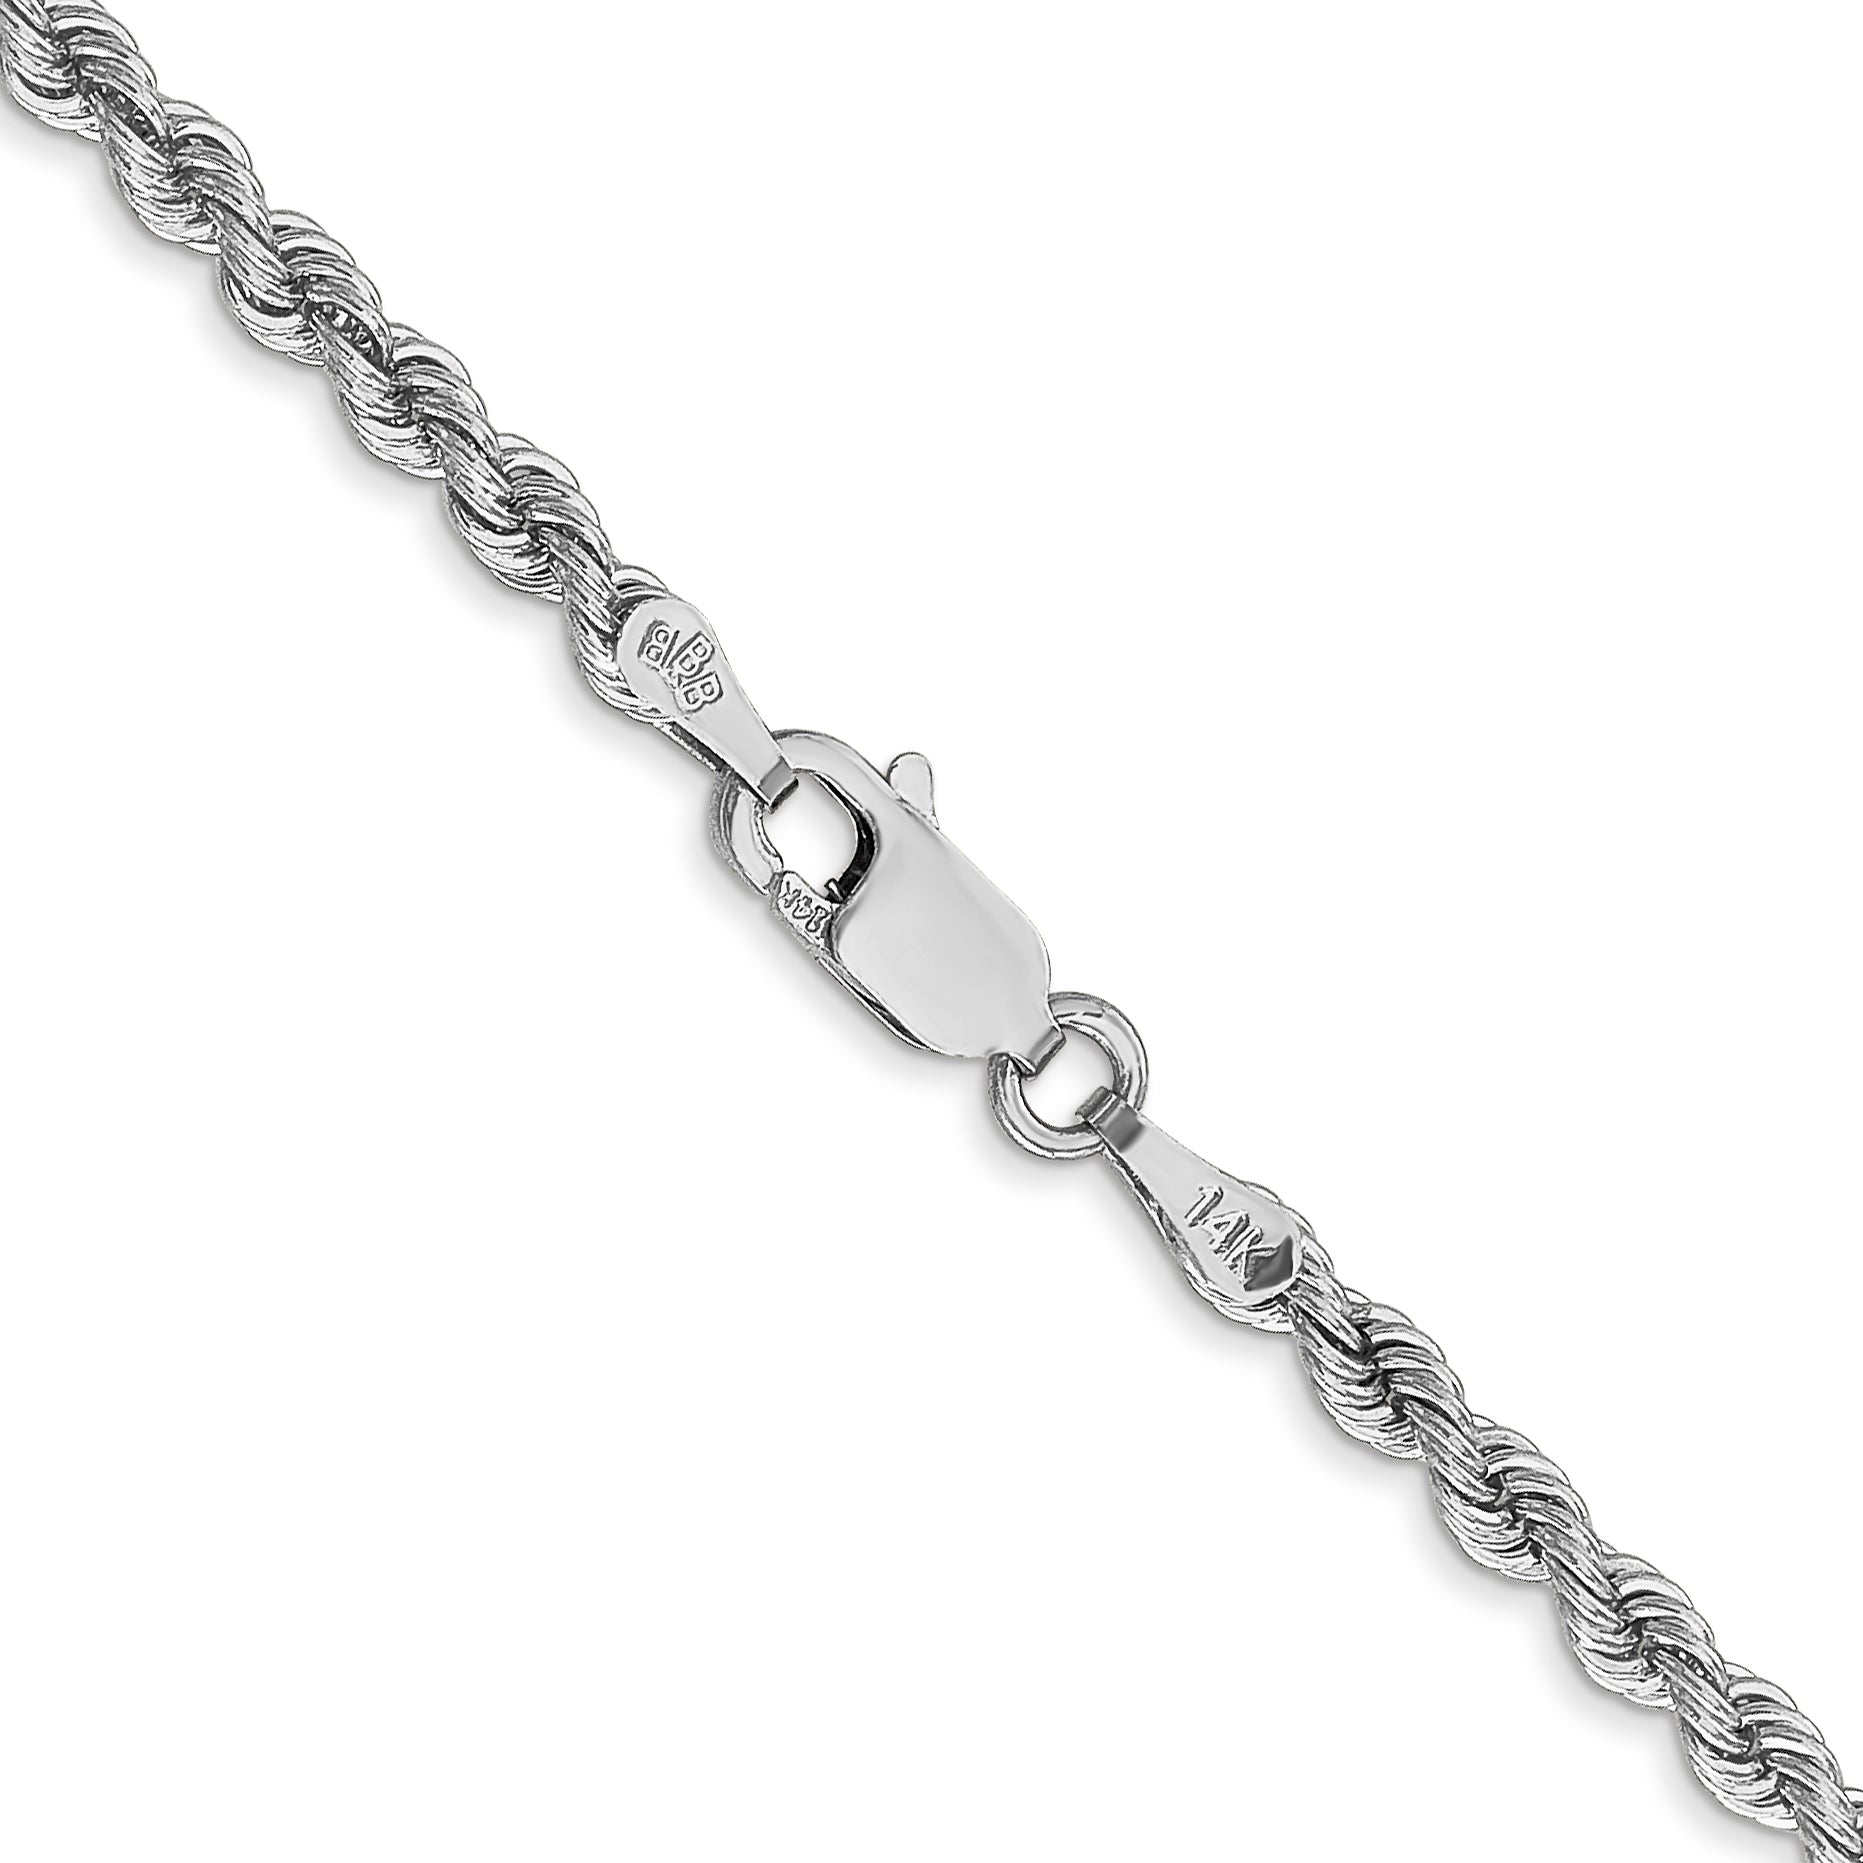 14K White Gold 16 inch 2.75mm Regular Rope with Lobster Clasp Chain